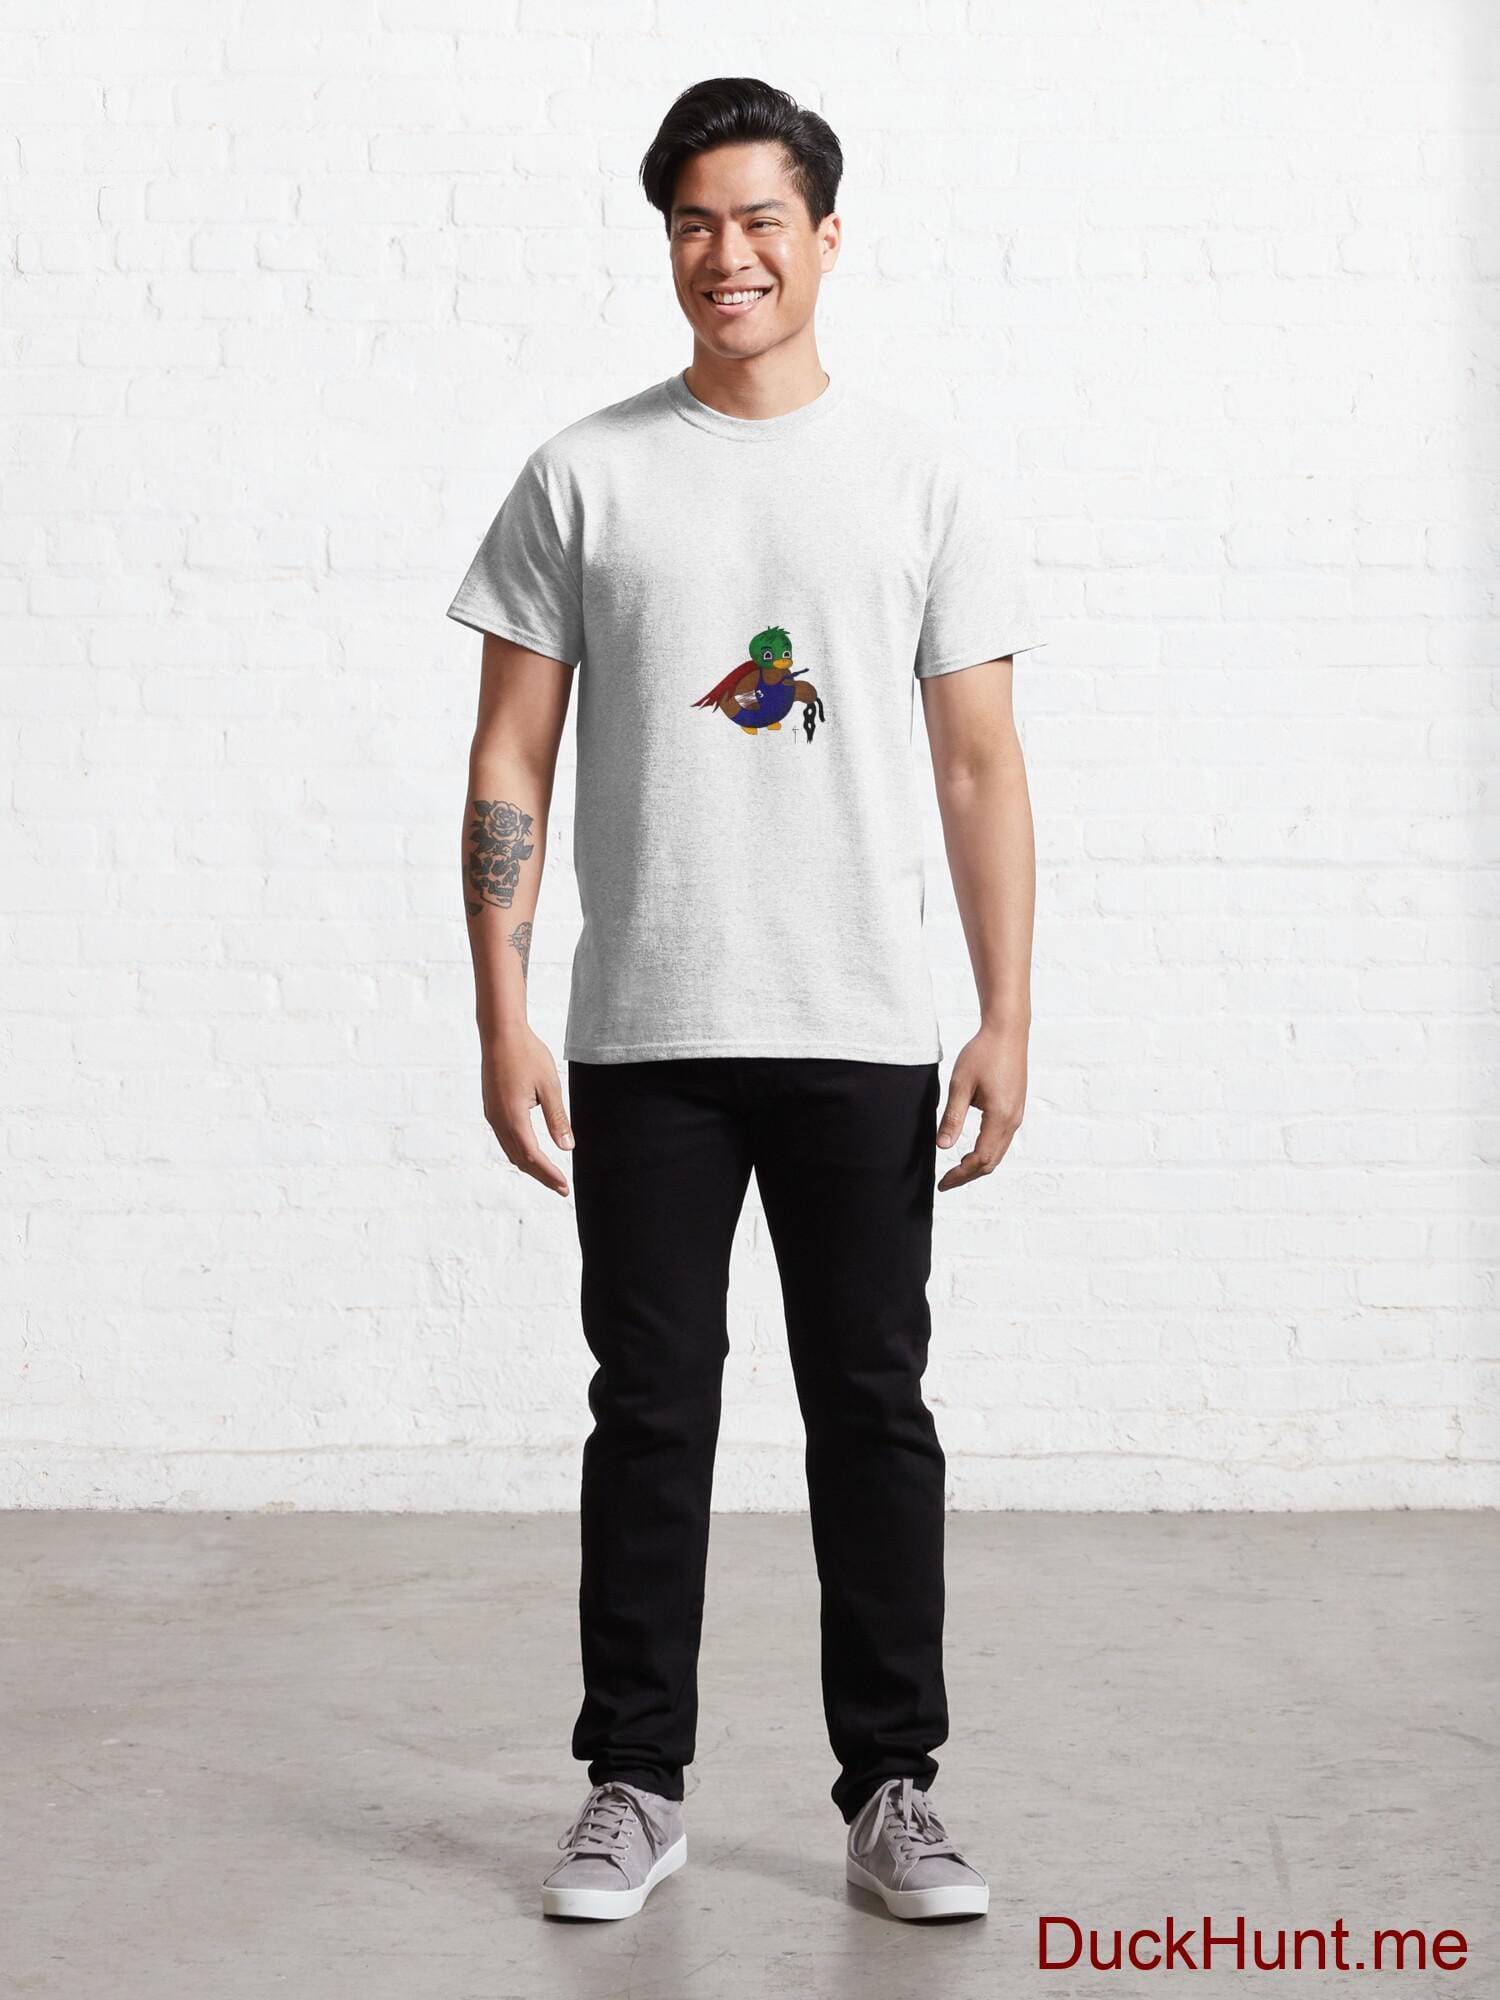 Dead DuckHunt Boss (smokeless) White Classic T-Shirt (Front printed) alternative image 6